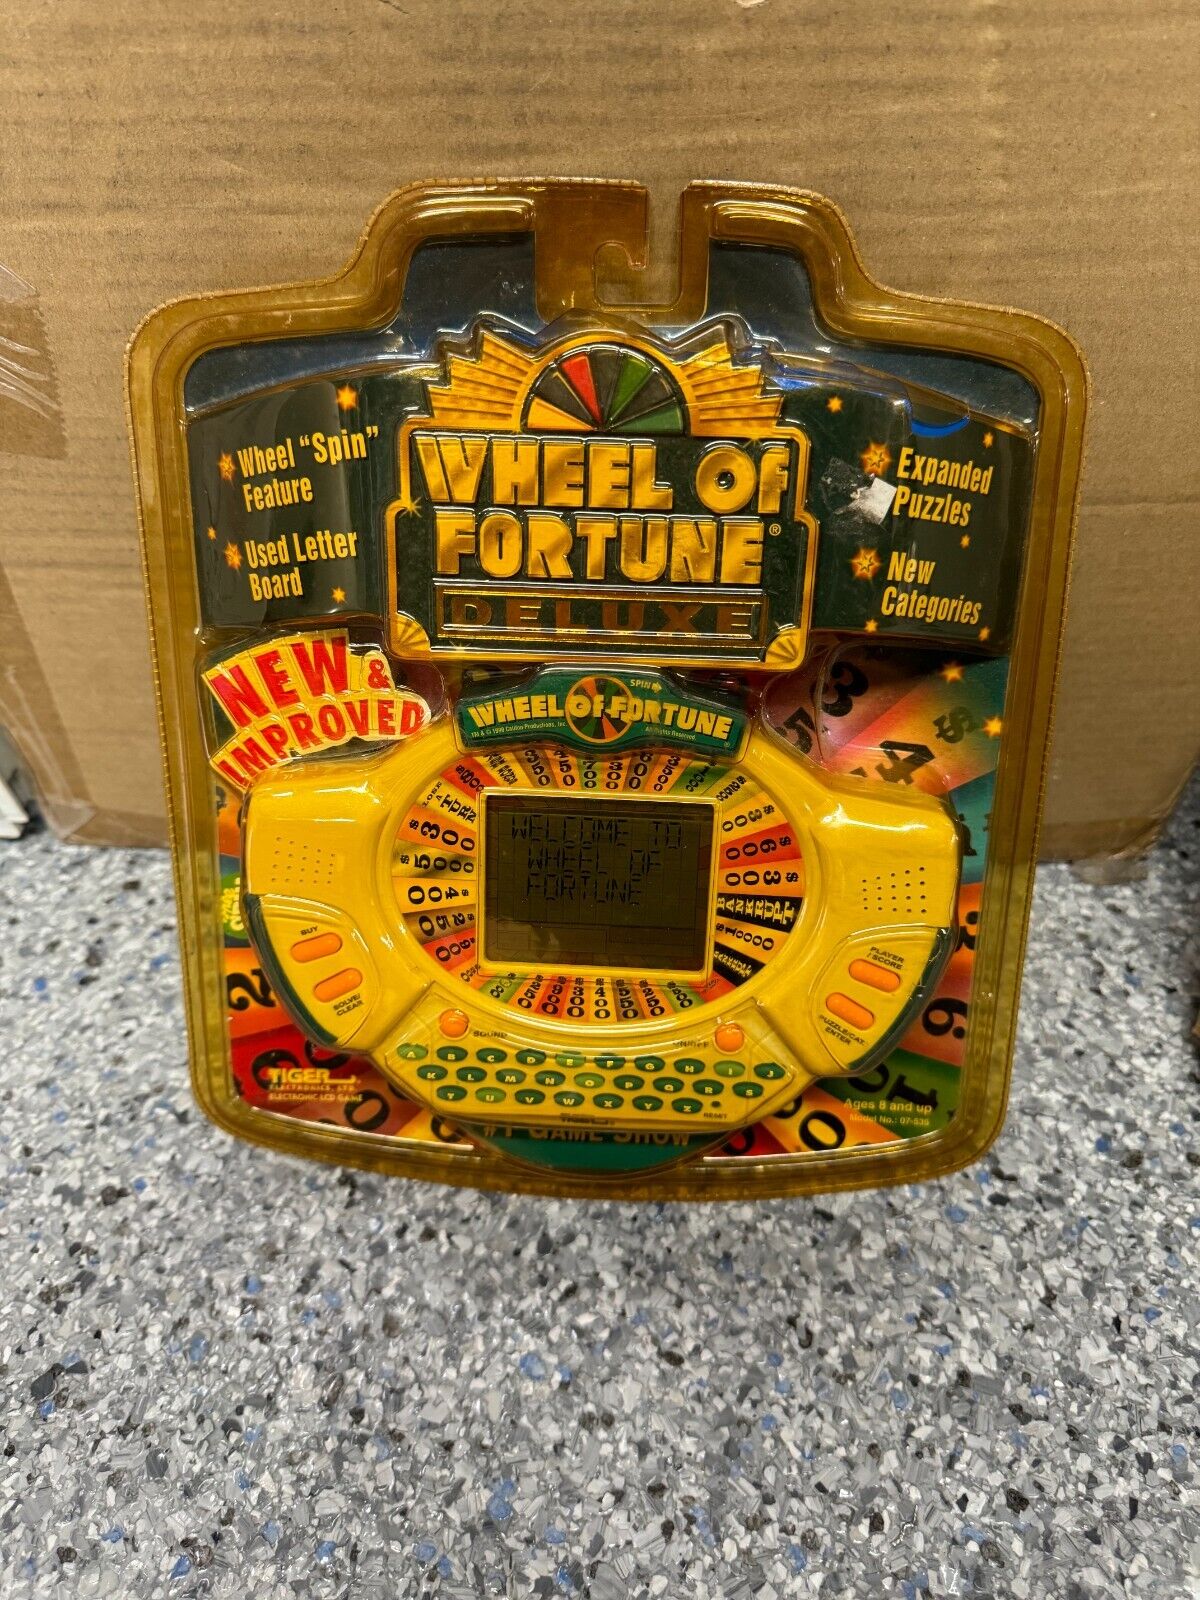 Tiger 1999 Wheel of Fortune Deluxe Electronic Handheld Game - New